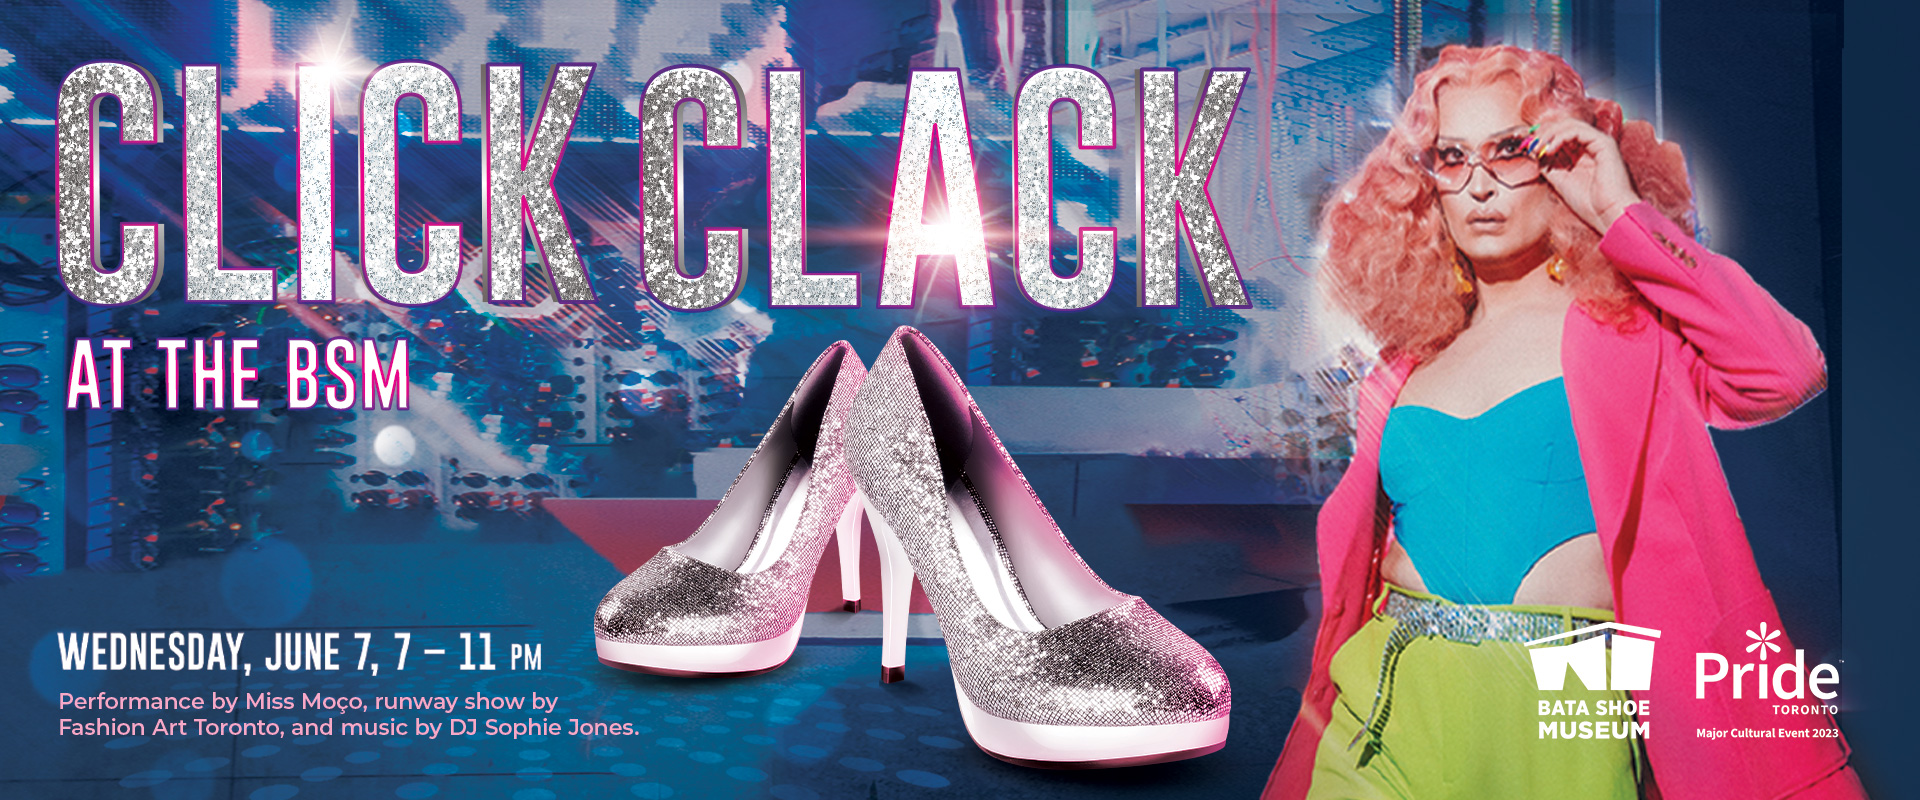 Click Clack Pride: Cost: $30/person or 4 for $100 When: Wed, June 7 from 7:00 pm to 11:00pm, 19+